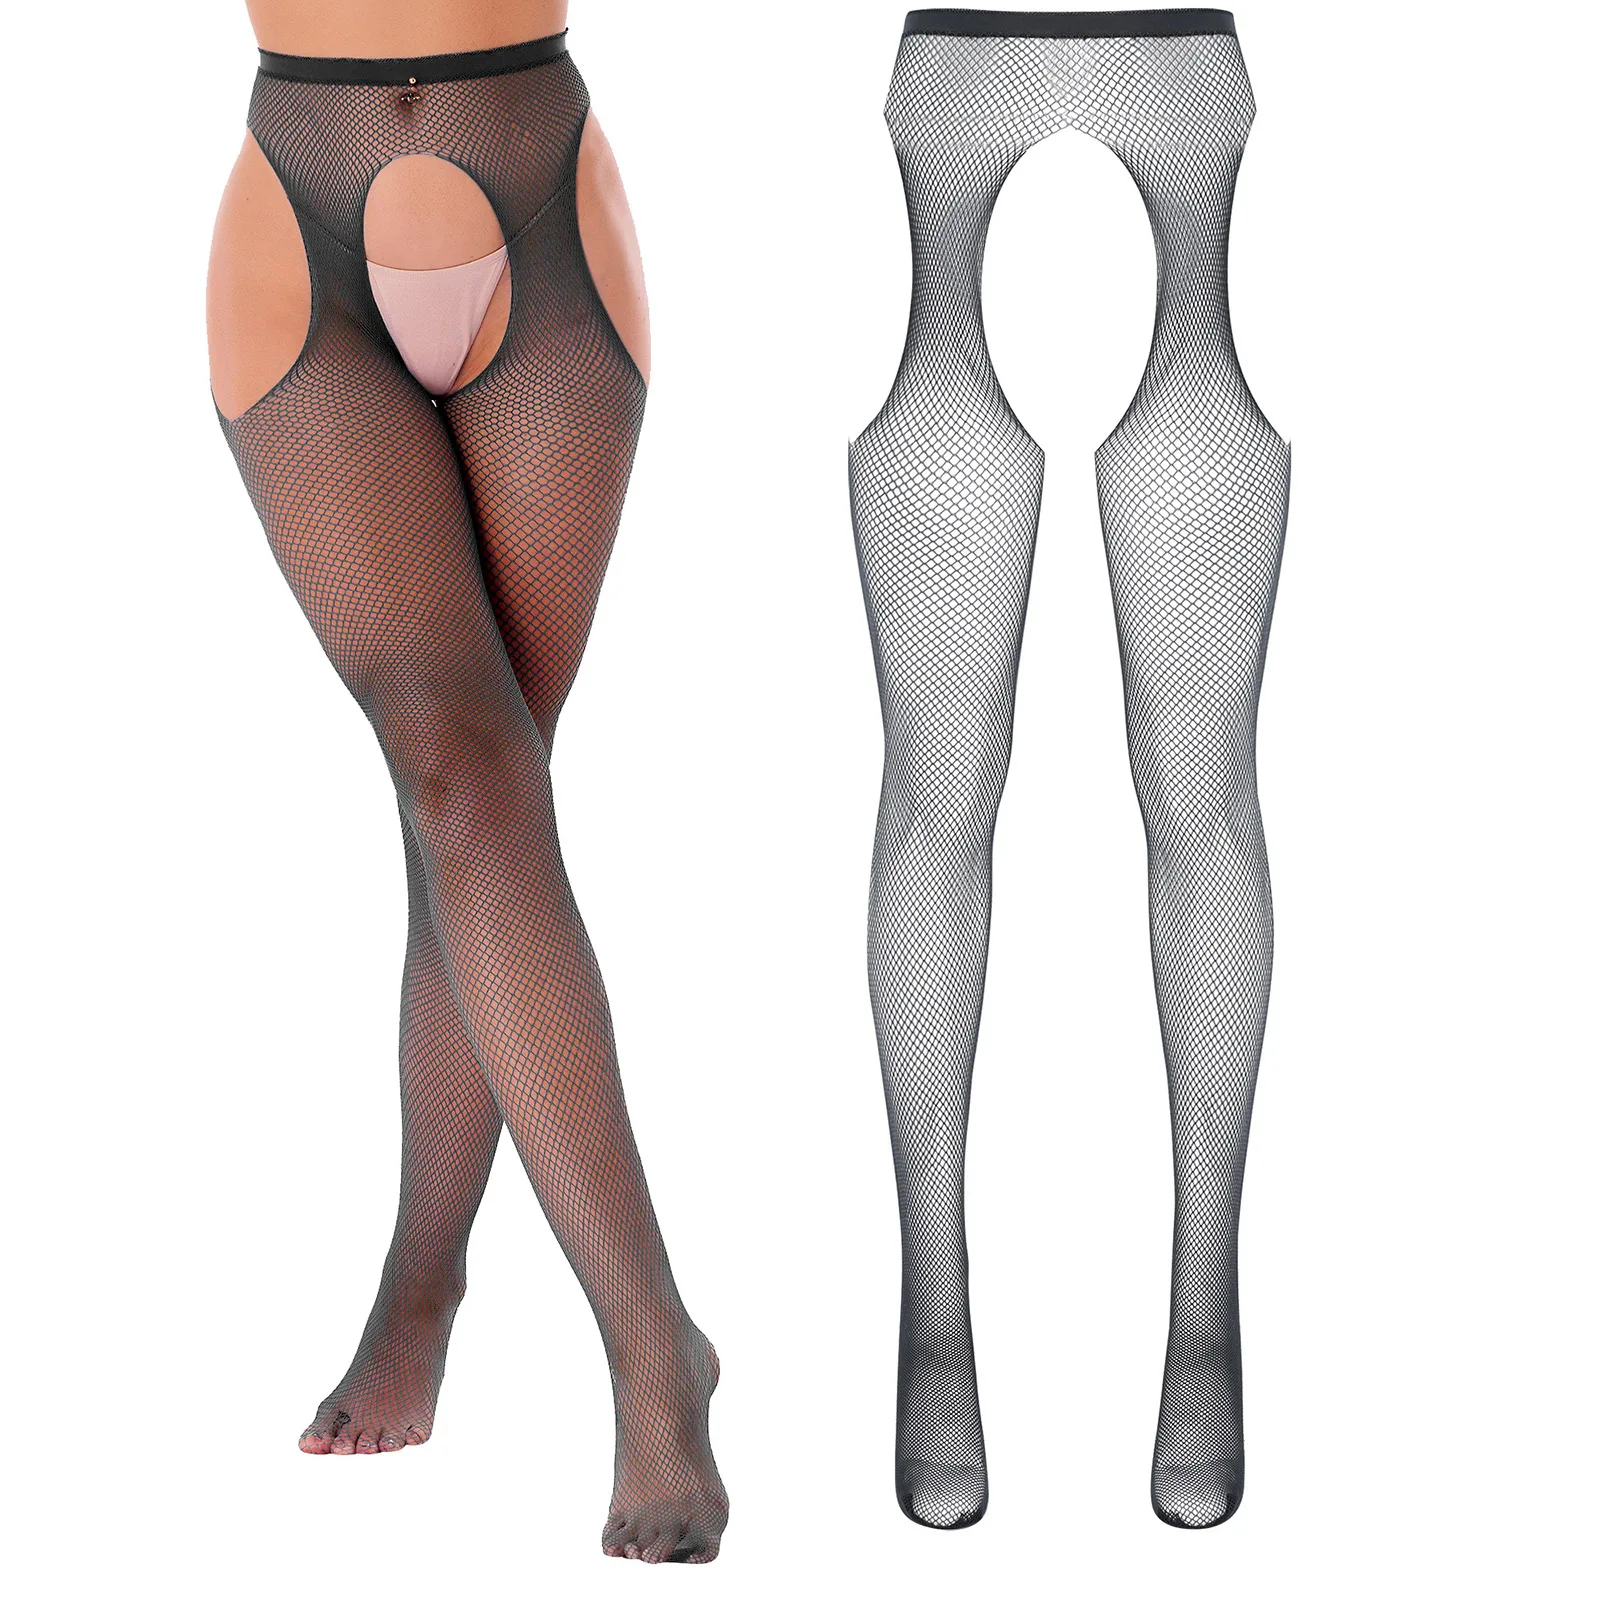 Womens Sexy Open Crotch Pantyhose Stockings Hollow Out Mid Waist Elastic Cutout Crotchless Leggings Underwear Erotic Lingerie body suit women sexy lingerie porno open crotch hollow stockings garter belt tights transparent erotic pantyhose long stockings